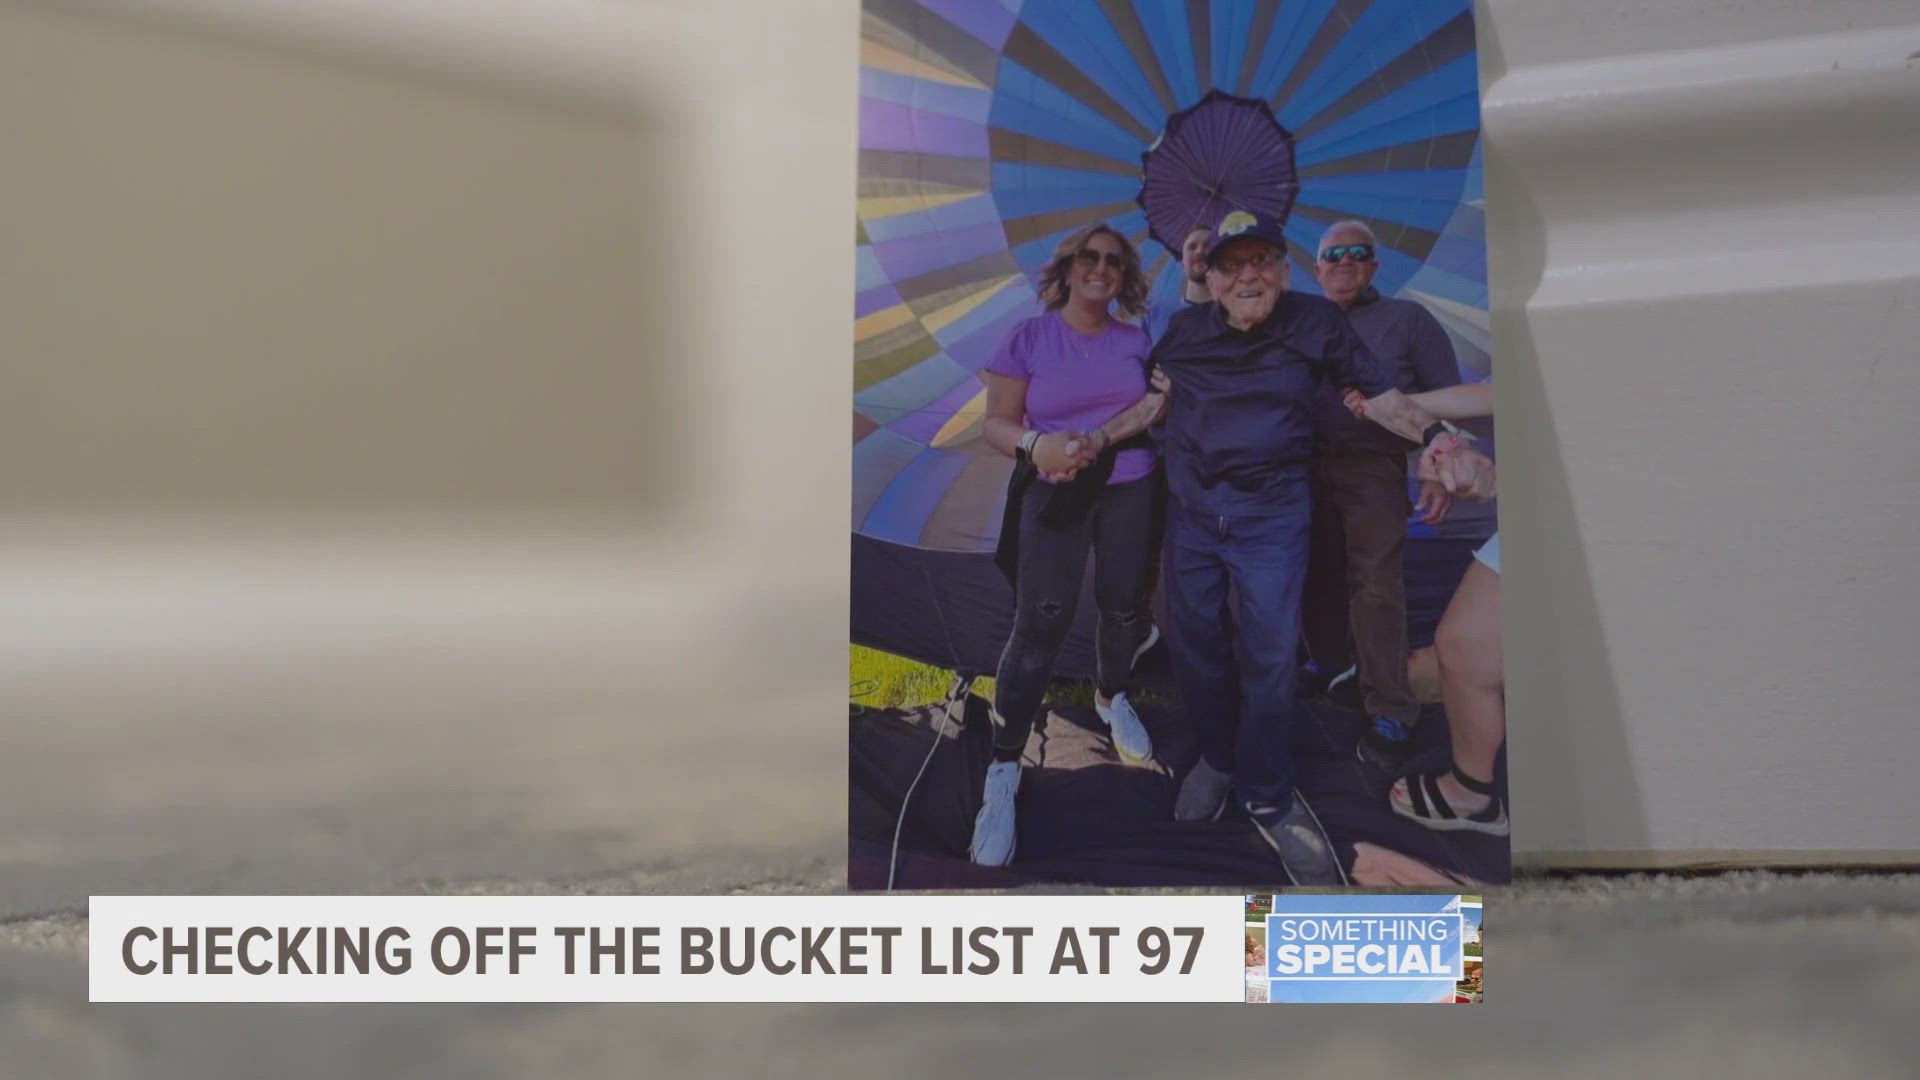 Losing someone you love puts life into perspective. For one man in a senior living home, it’s giving him a new mission – checking off his bucket list at 97.